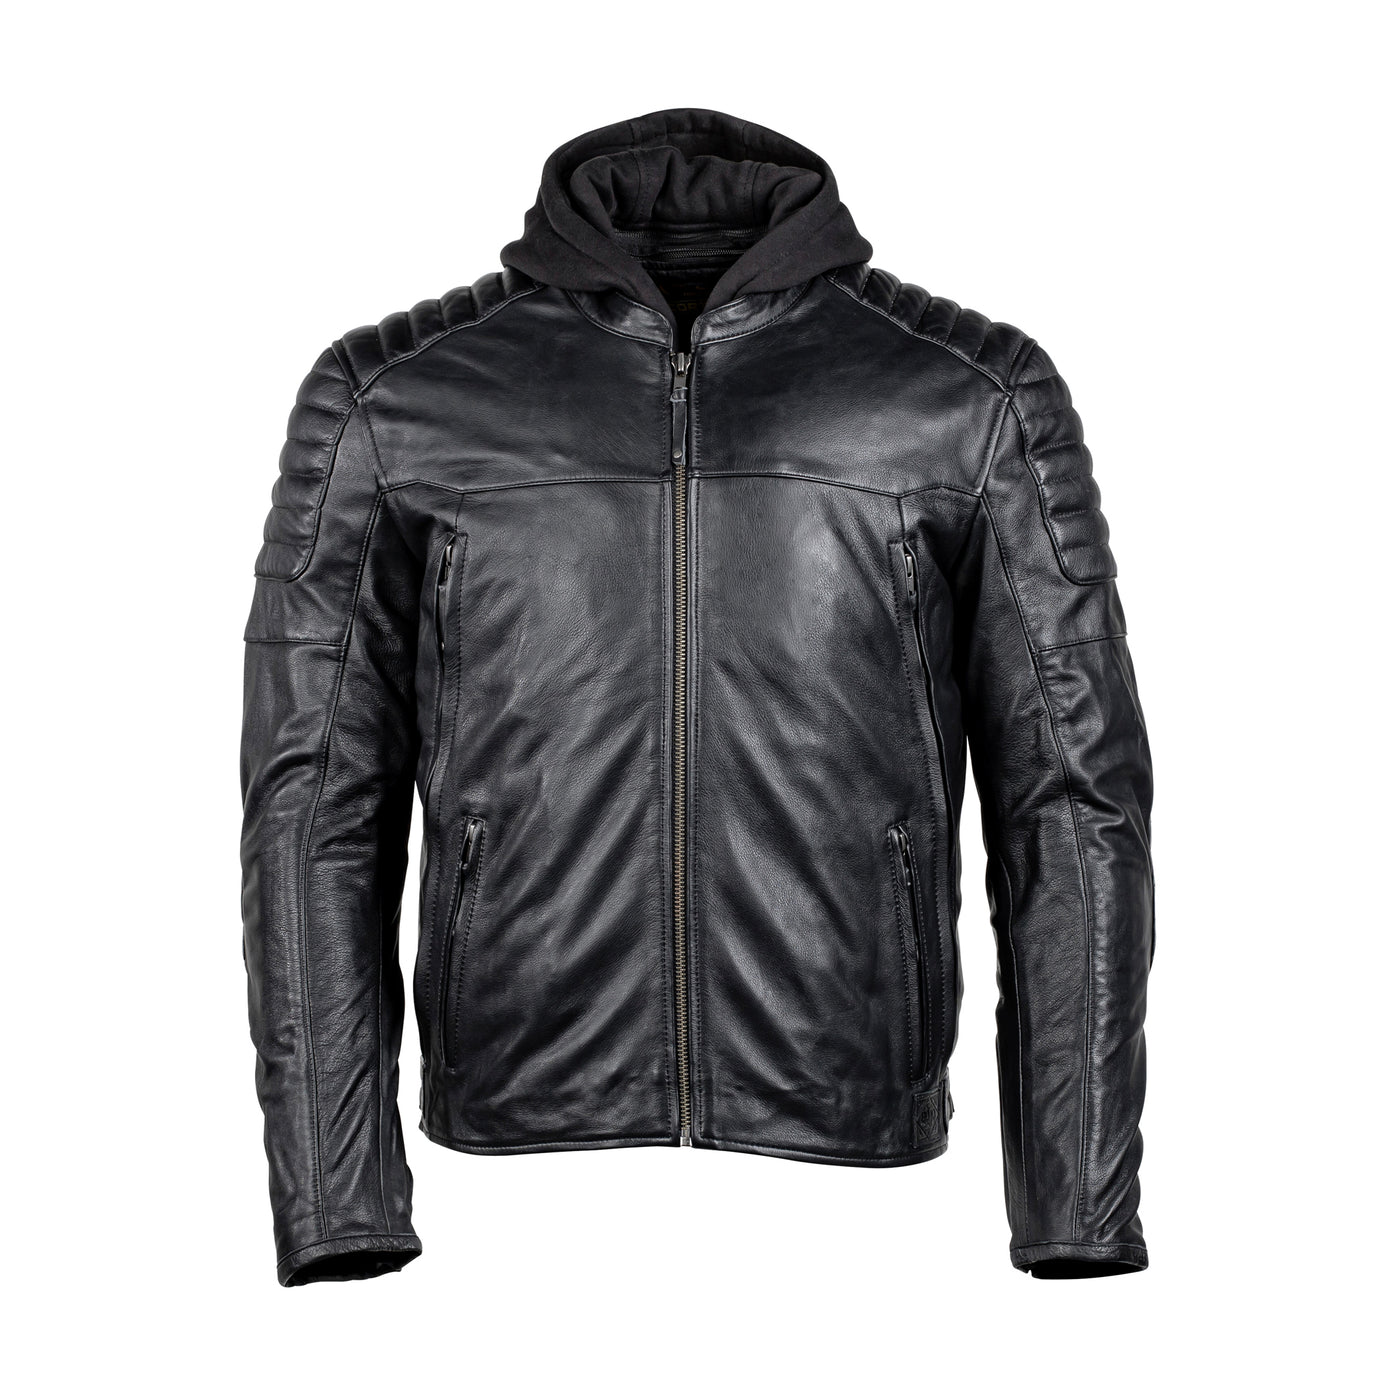 Cortech "The Marquee" Leather Jacket